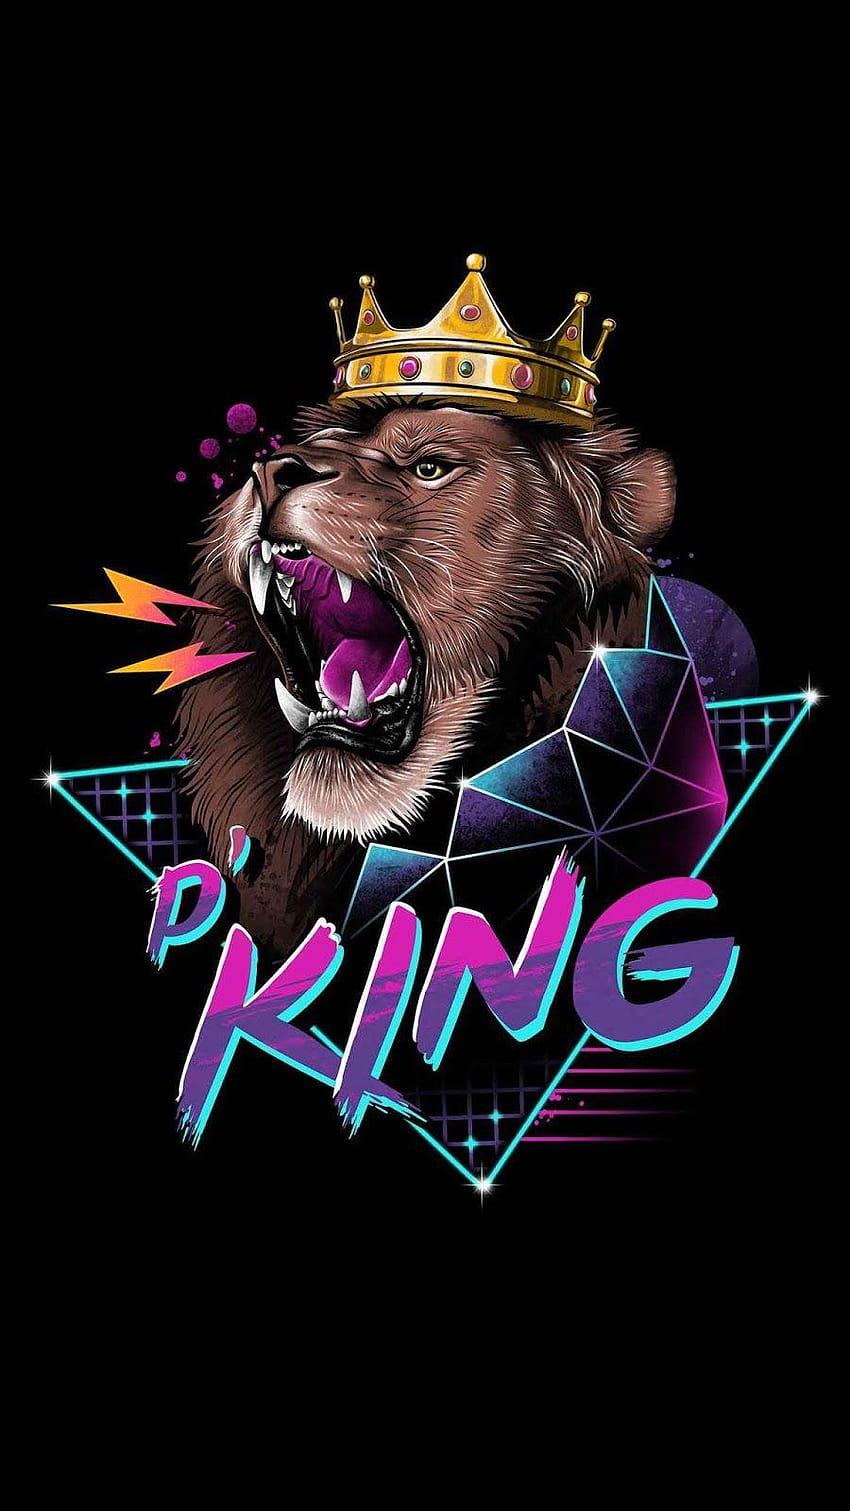 Lion King Crown in 2019, king and queen logos iphone HD phone wallpaper